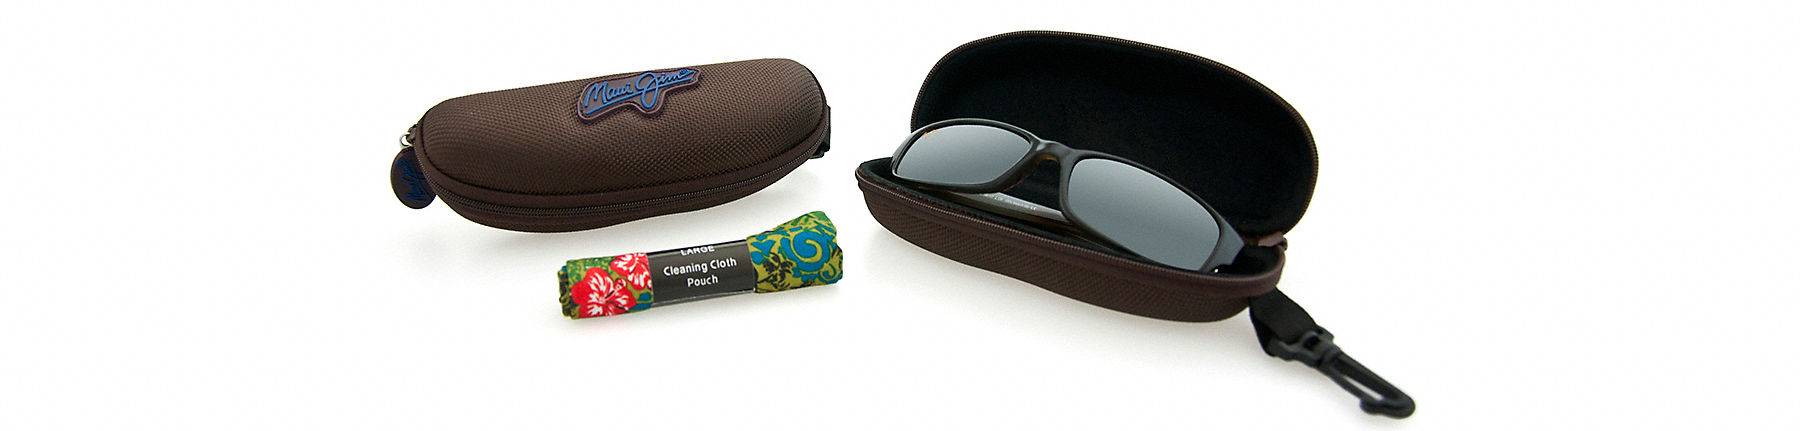 brown sport sunglass case opened with sunglasses inside beside a cleaning cloth bag